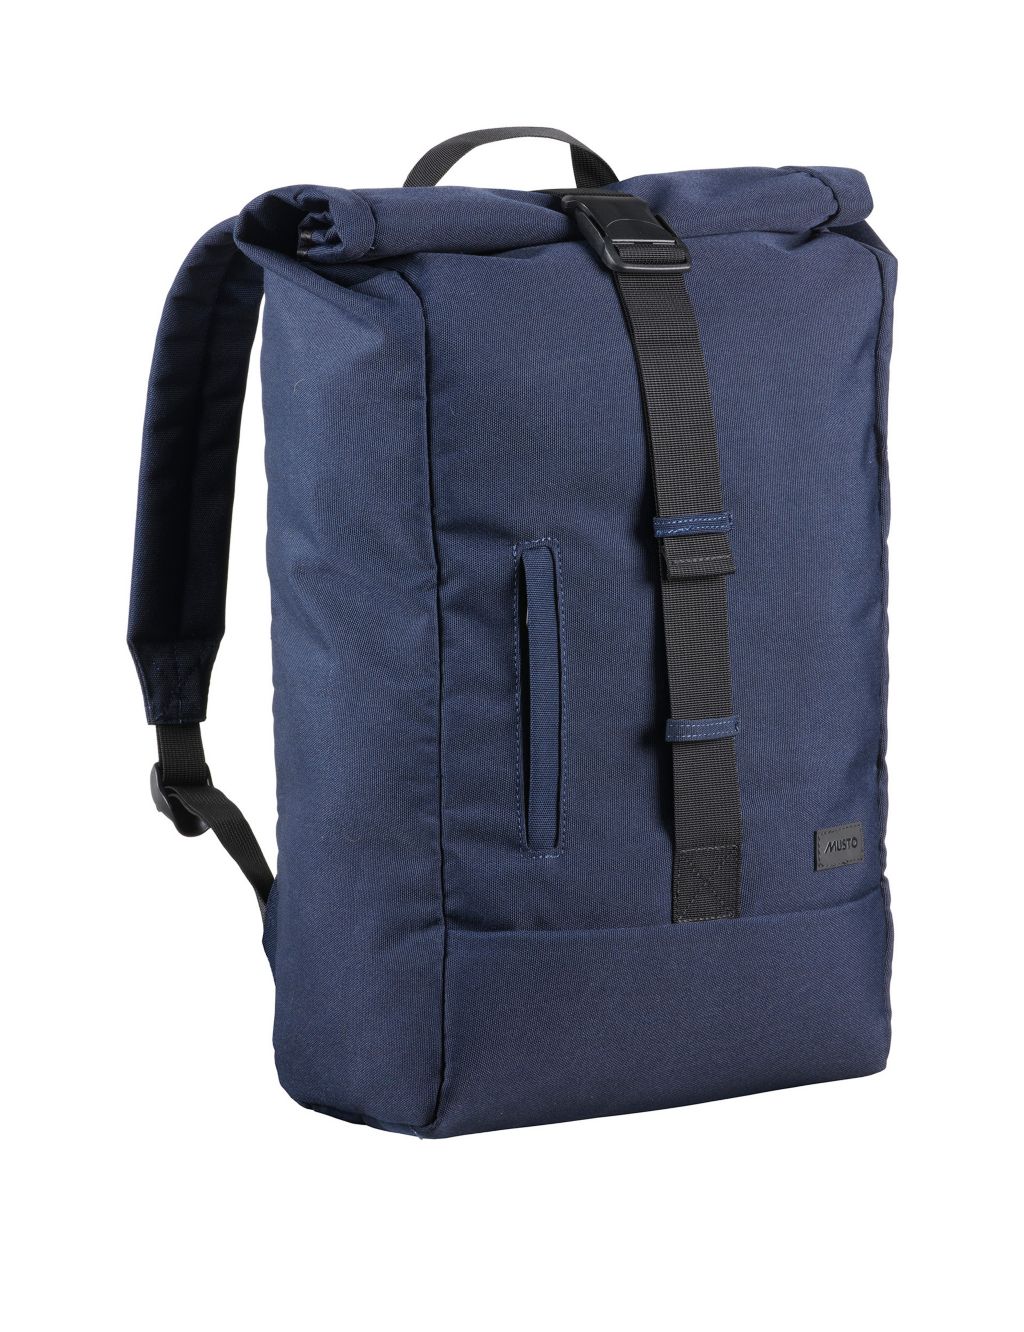 Canvas Rolltop Backpack image 4